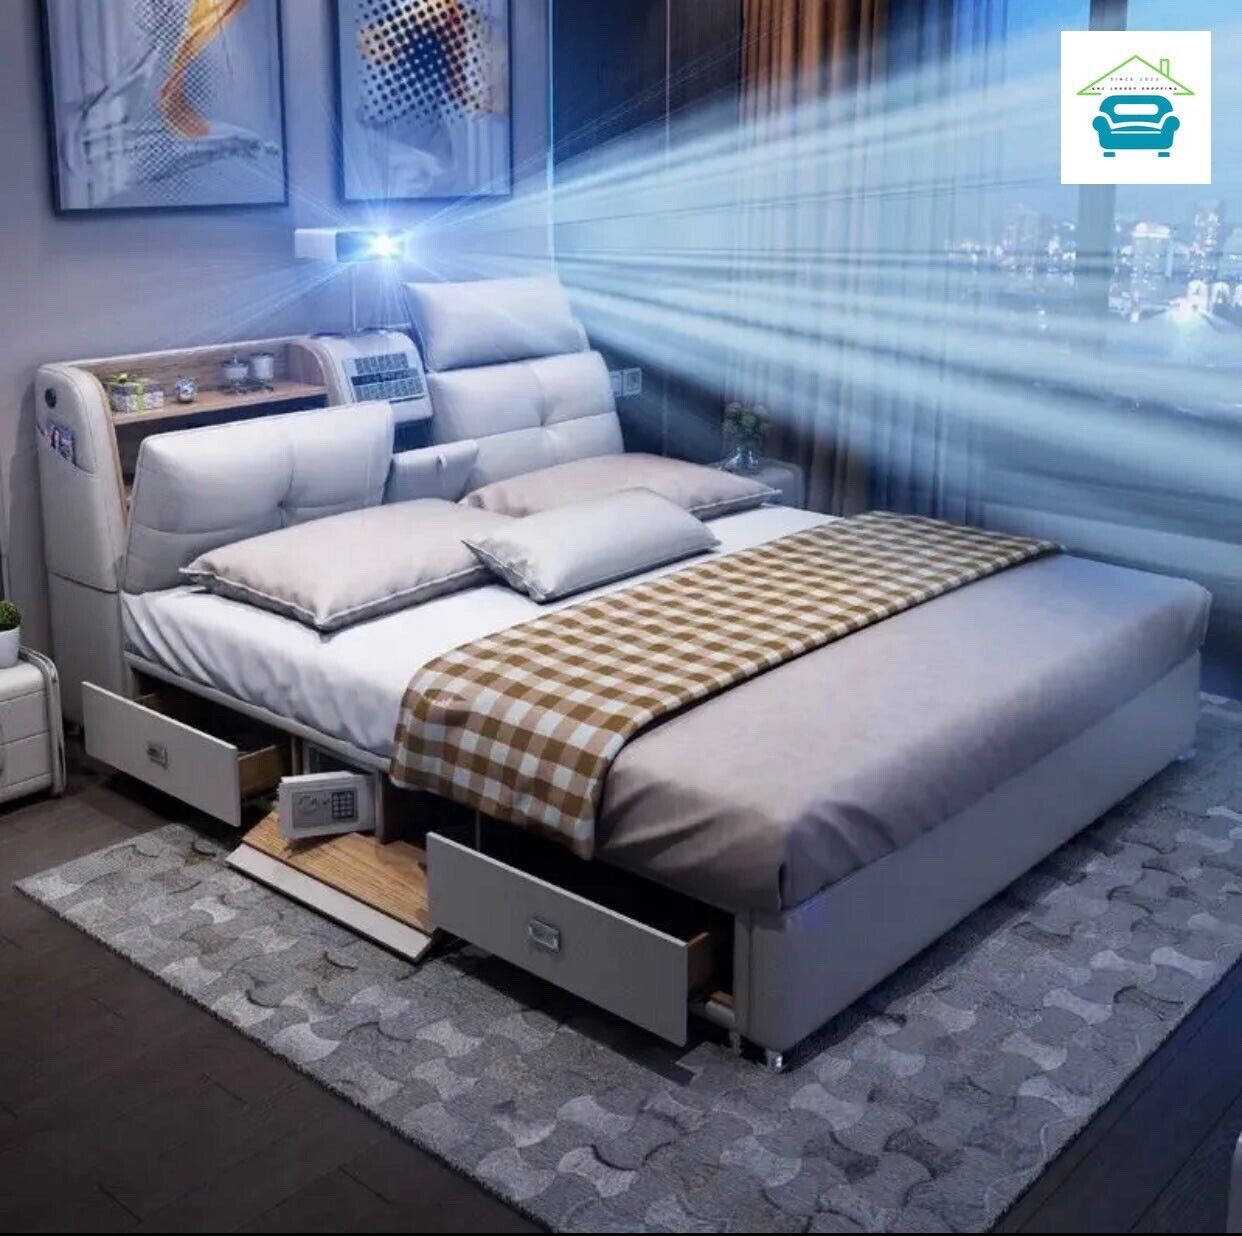 Smart Bed with High Box, Massage, Bluetooth speaker, Projector, Air Purifier